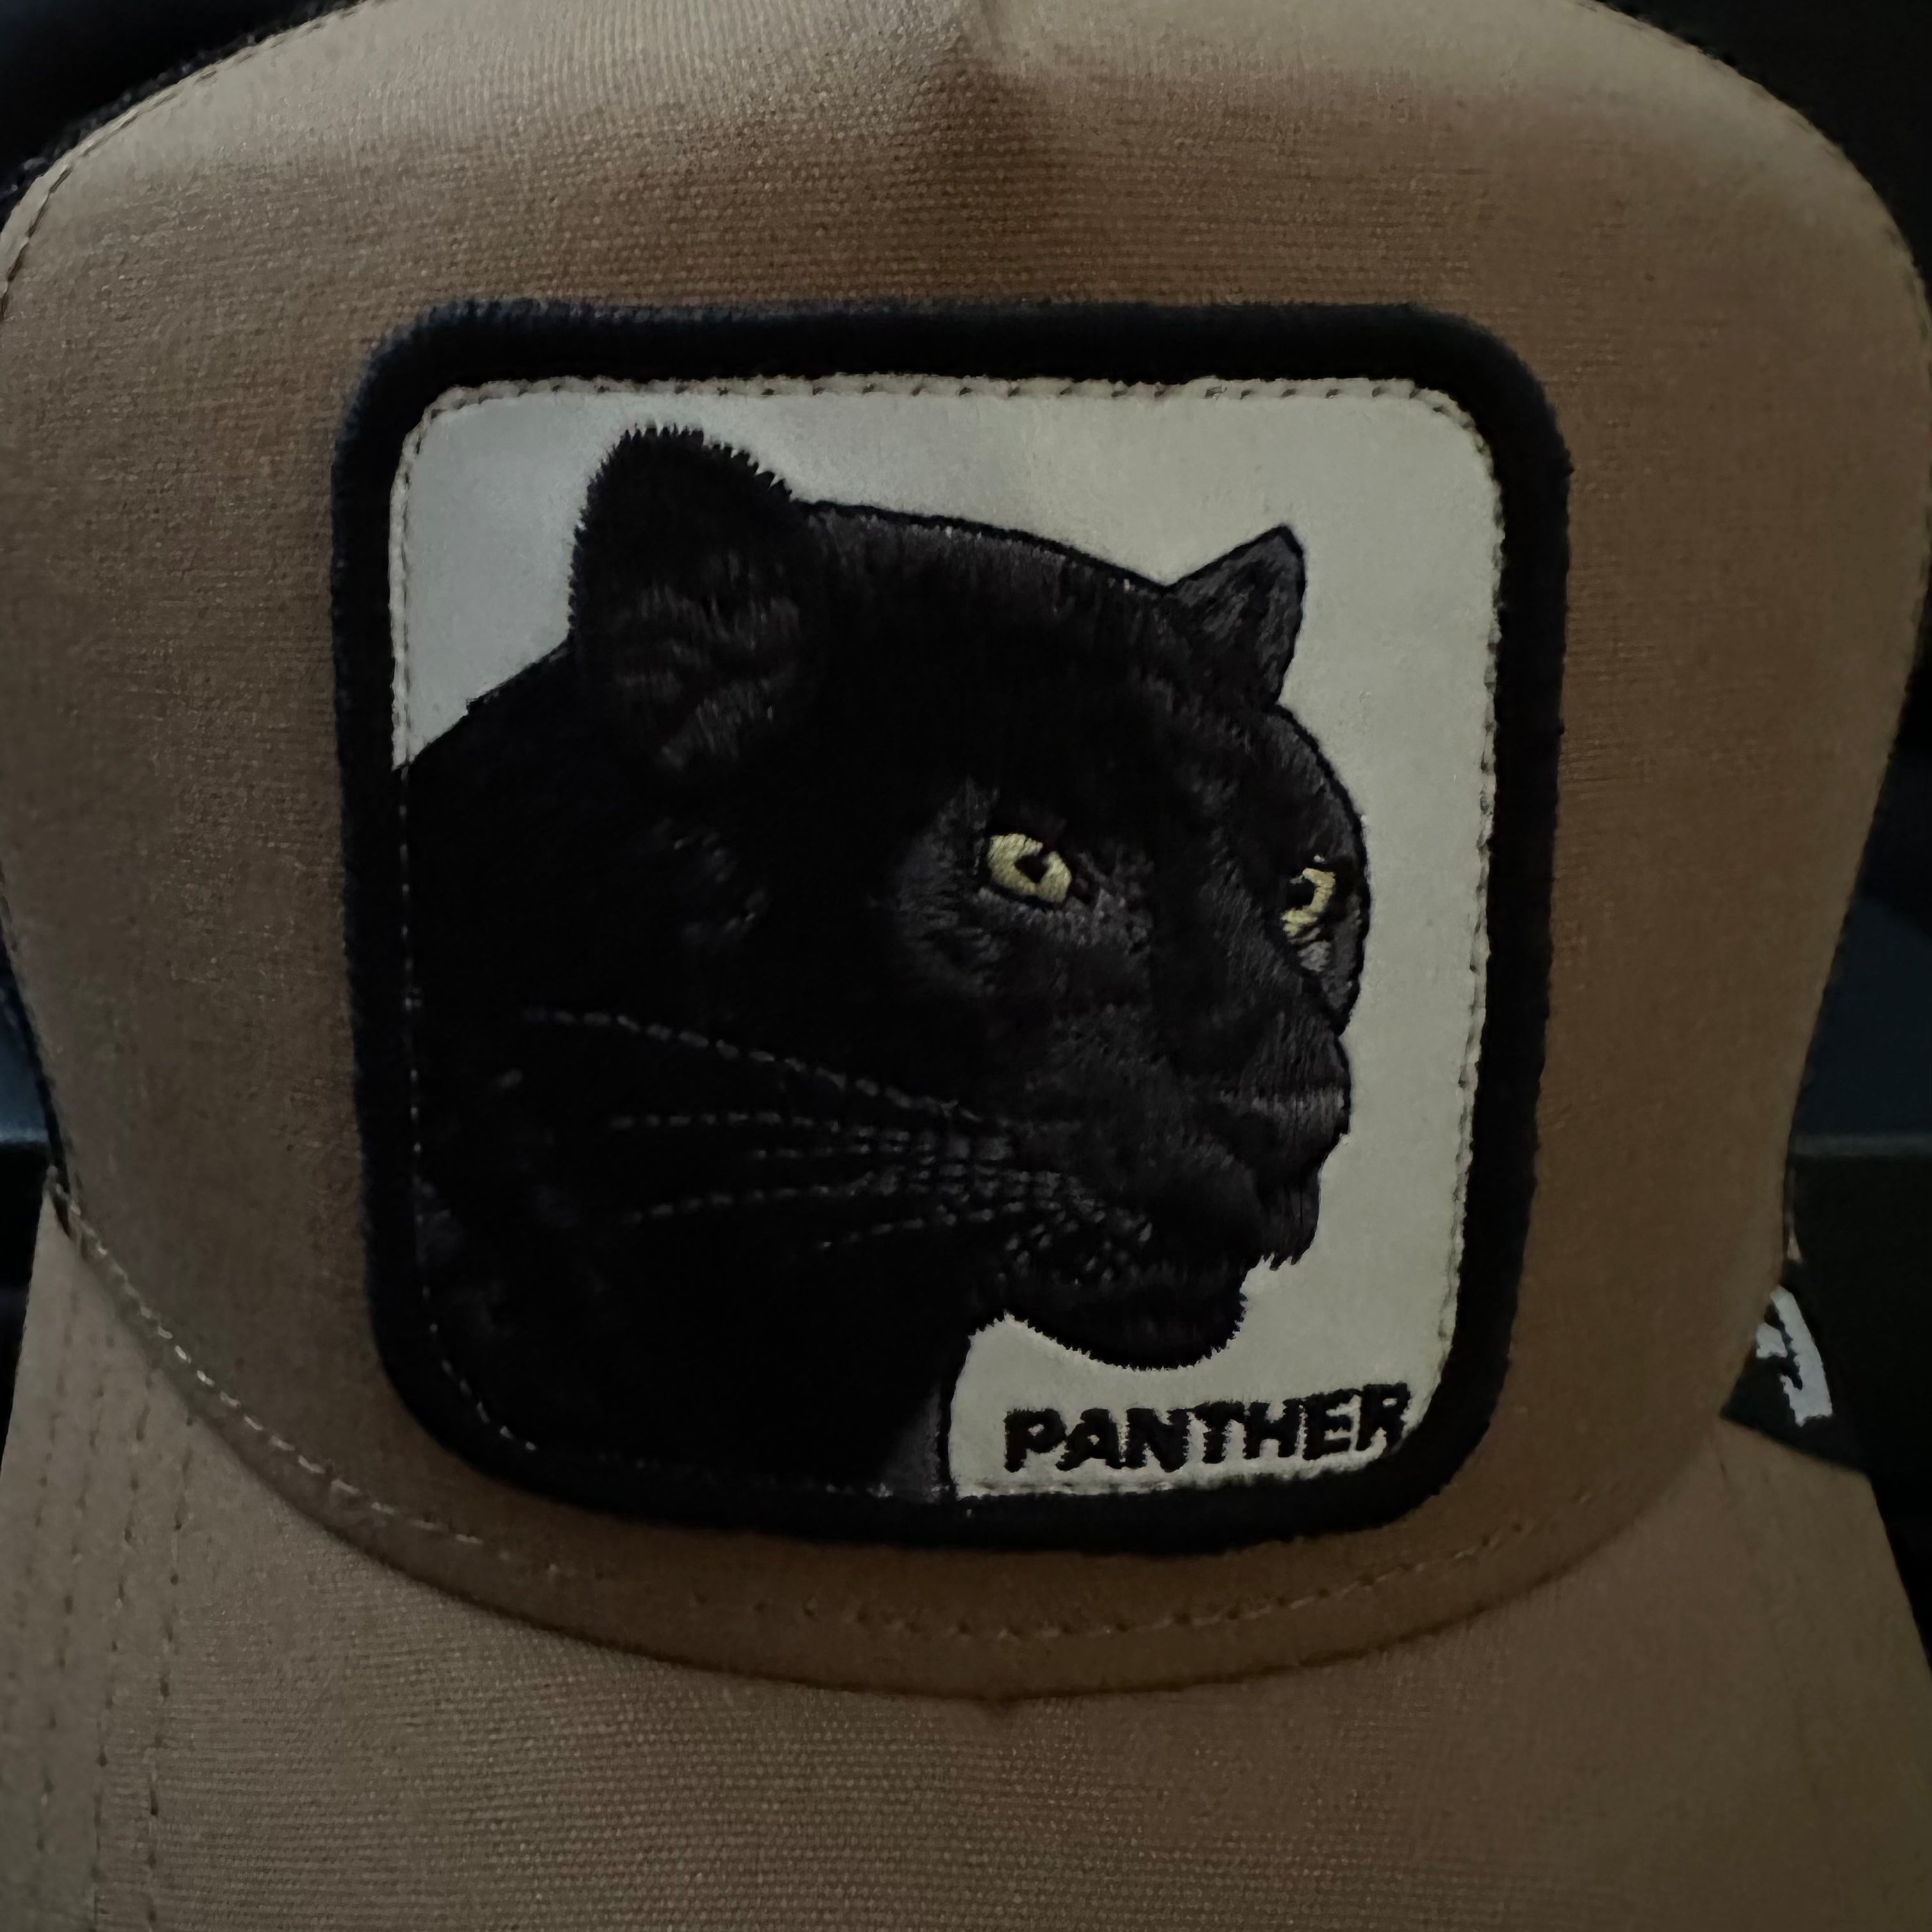 THE PANTHER Europe Edition